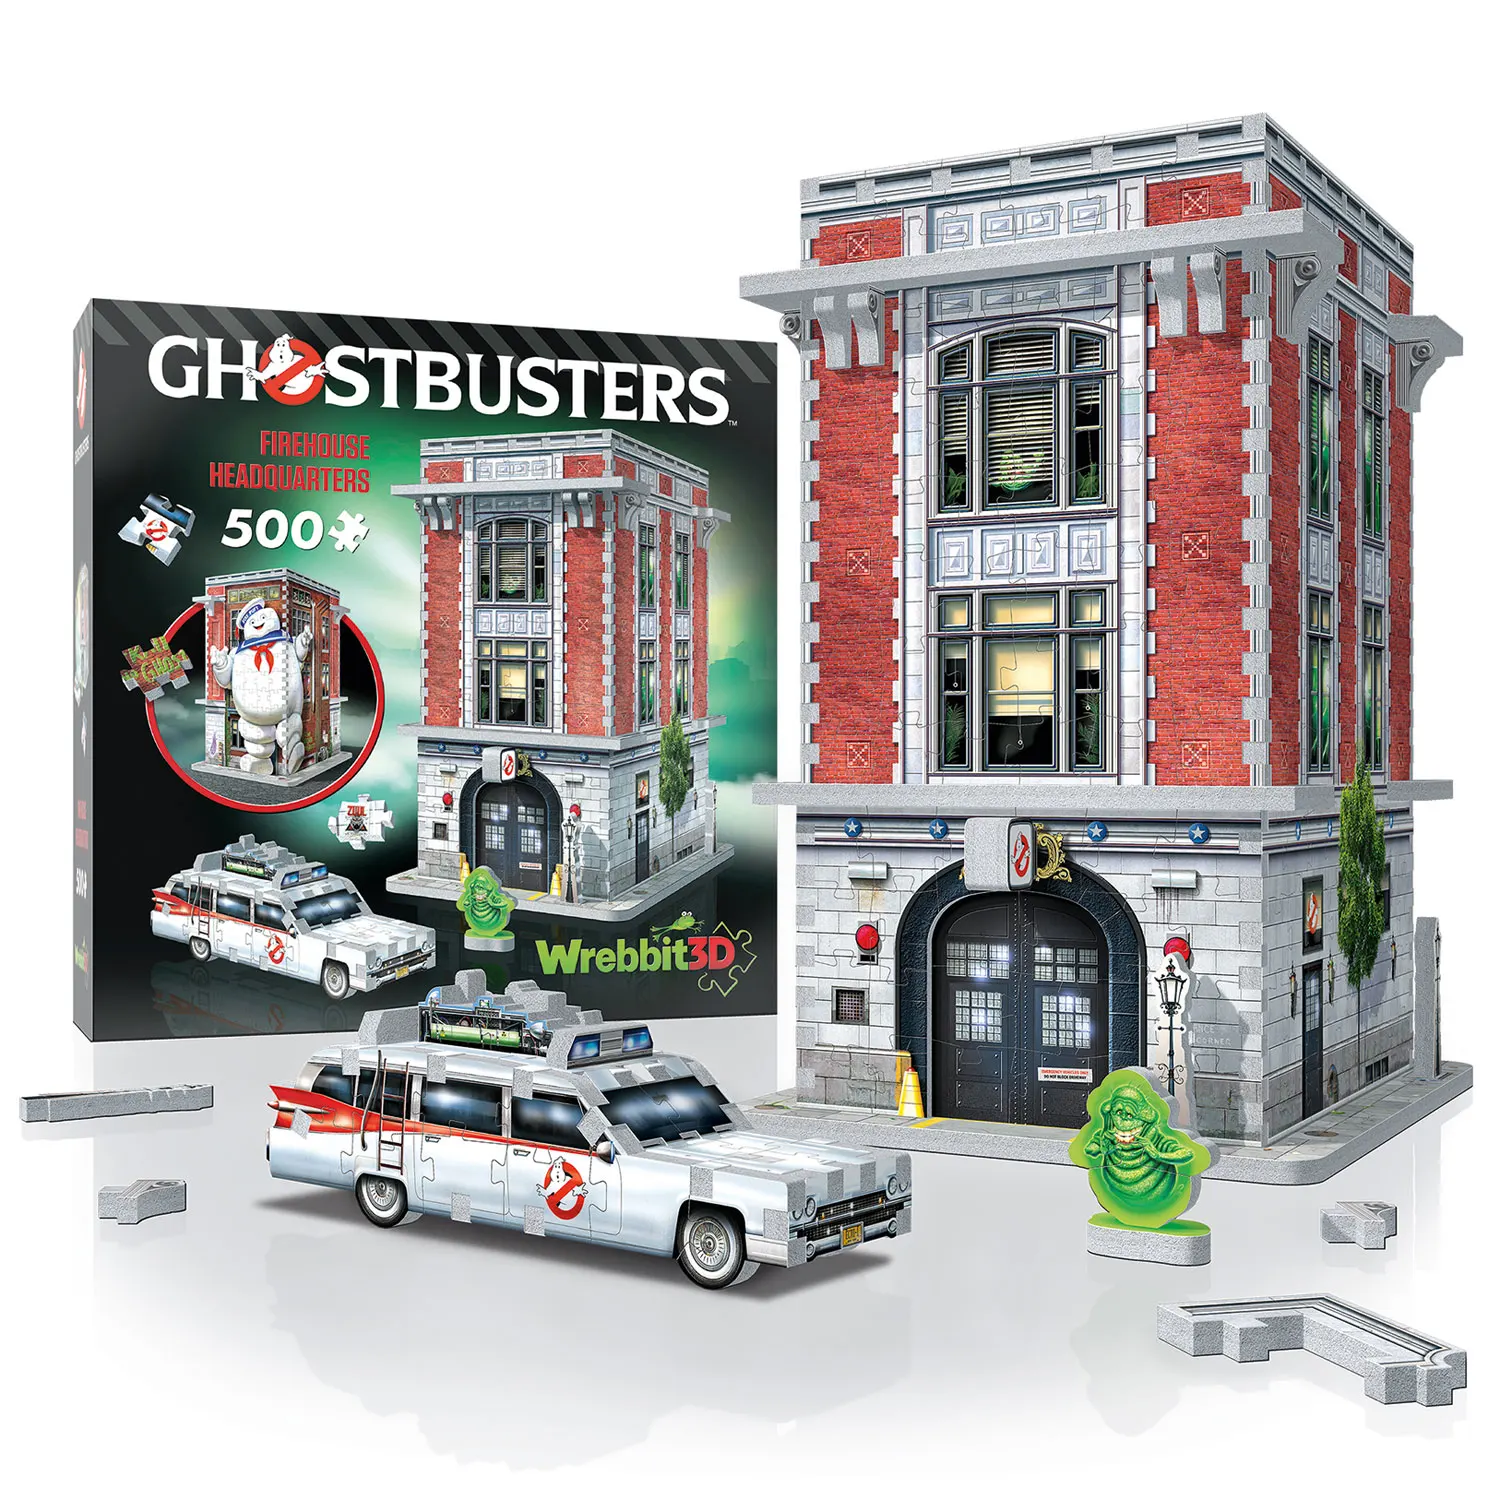 GHOSTBUSTERS FireHouse HQ (500Teile) - 3D-Puzzle